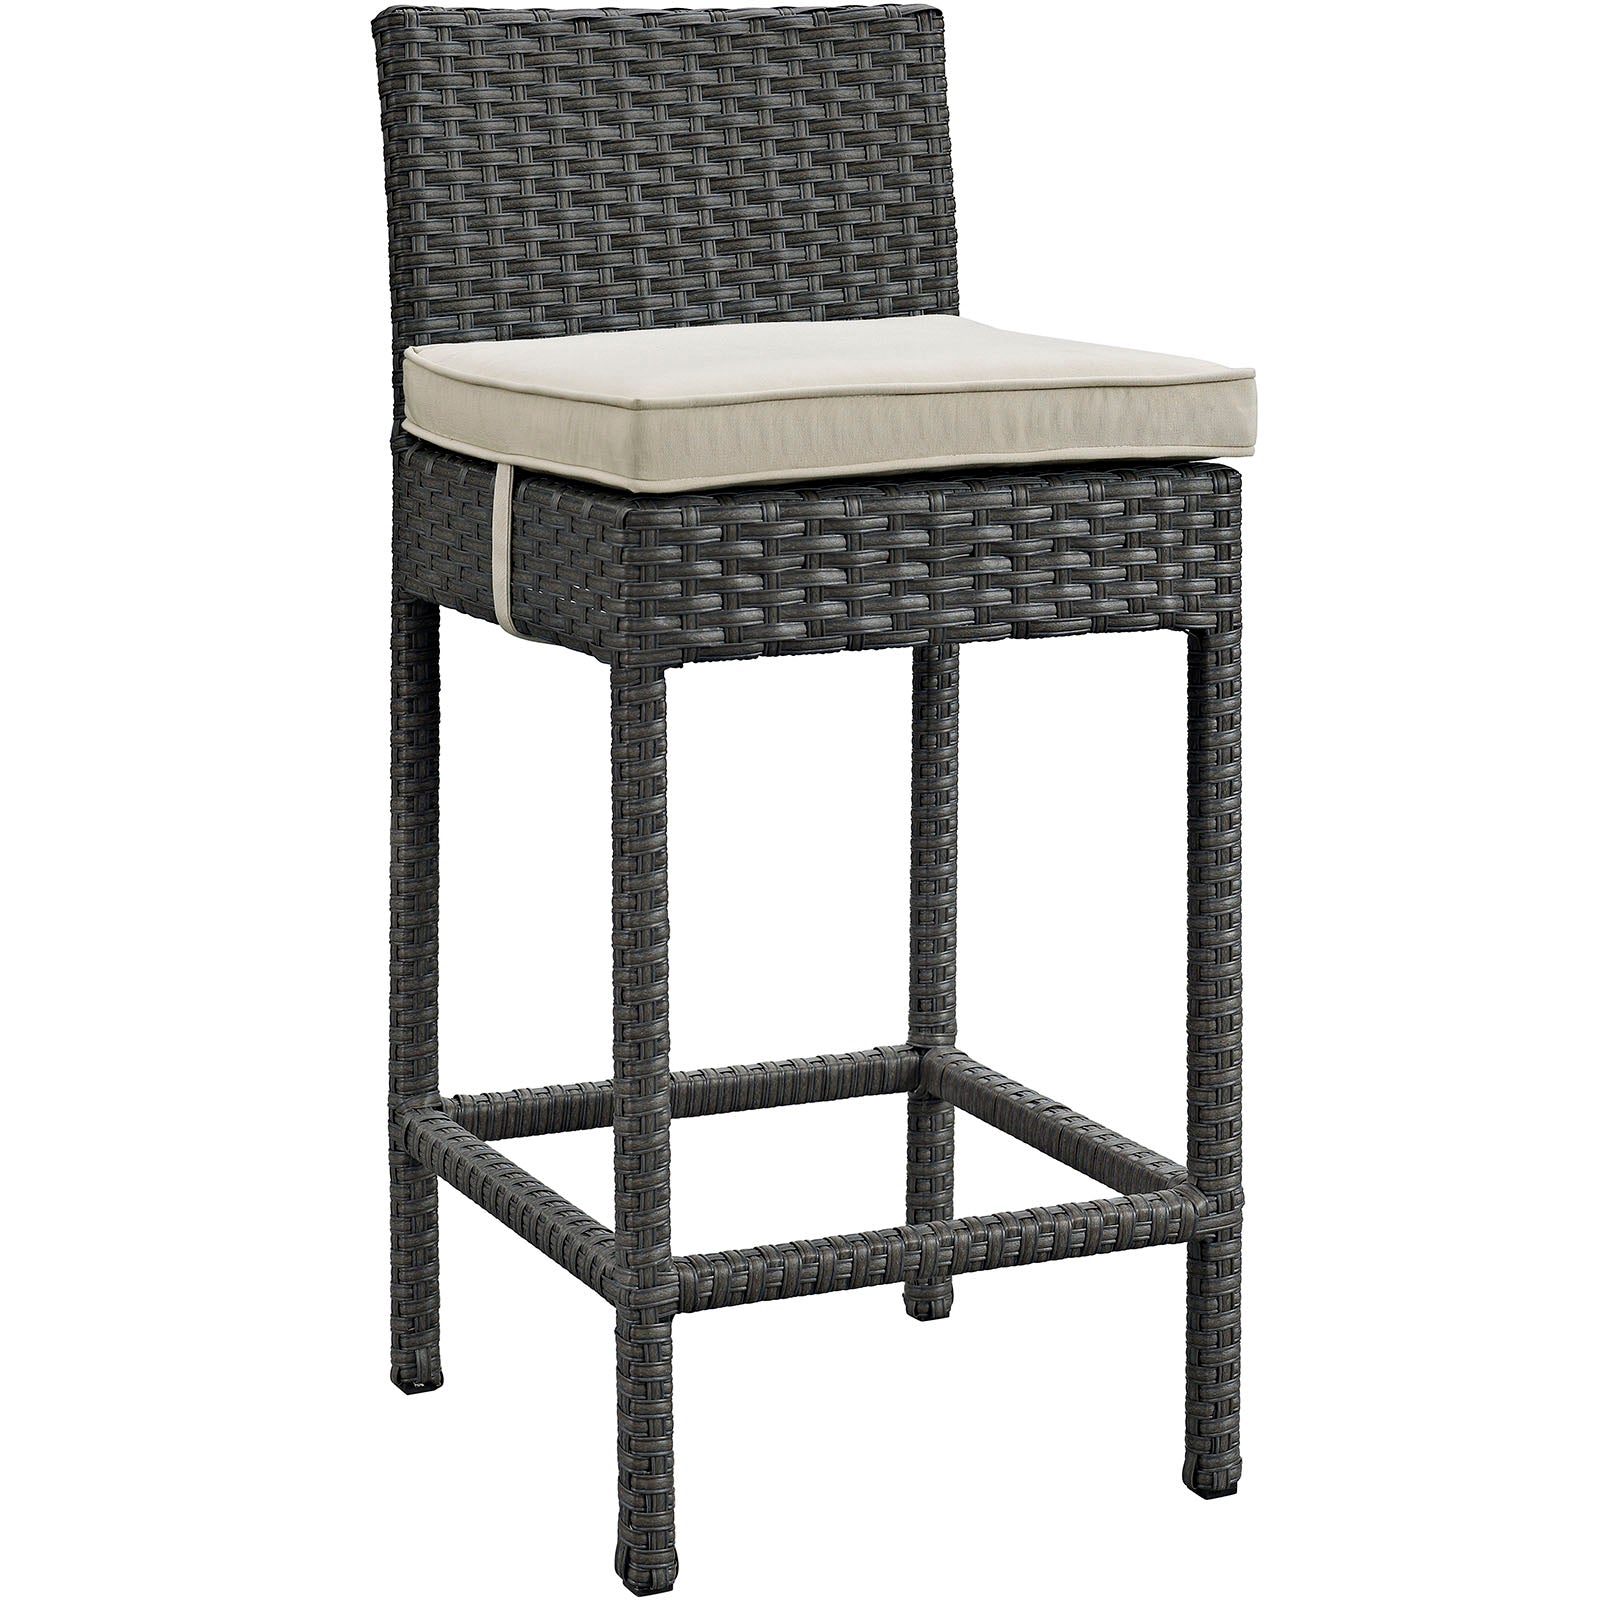 Modway Outdoor Barstools - Sojourn Outdoor Bar Stool Antique Canvas & Beige